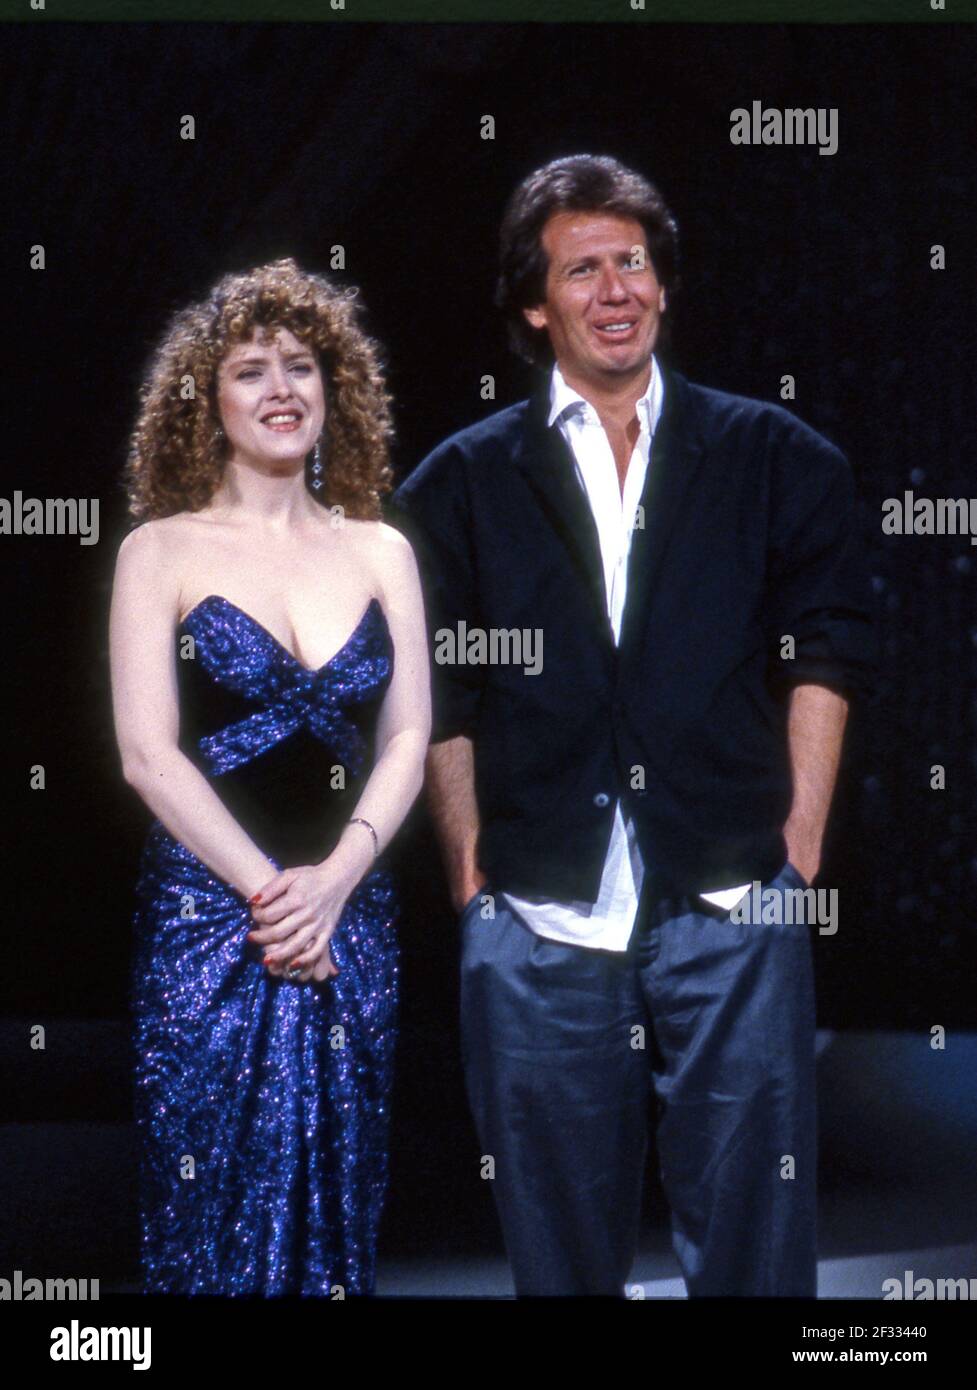 Cable Ace Awards – Gary Shandling und Bernadette Peters, 1980s Stockfoto